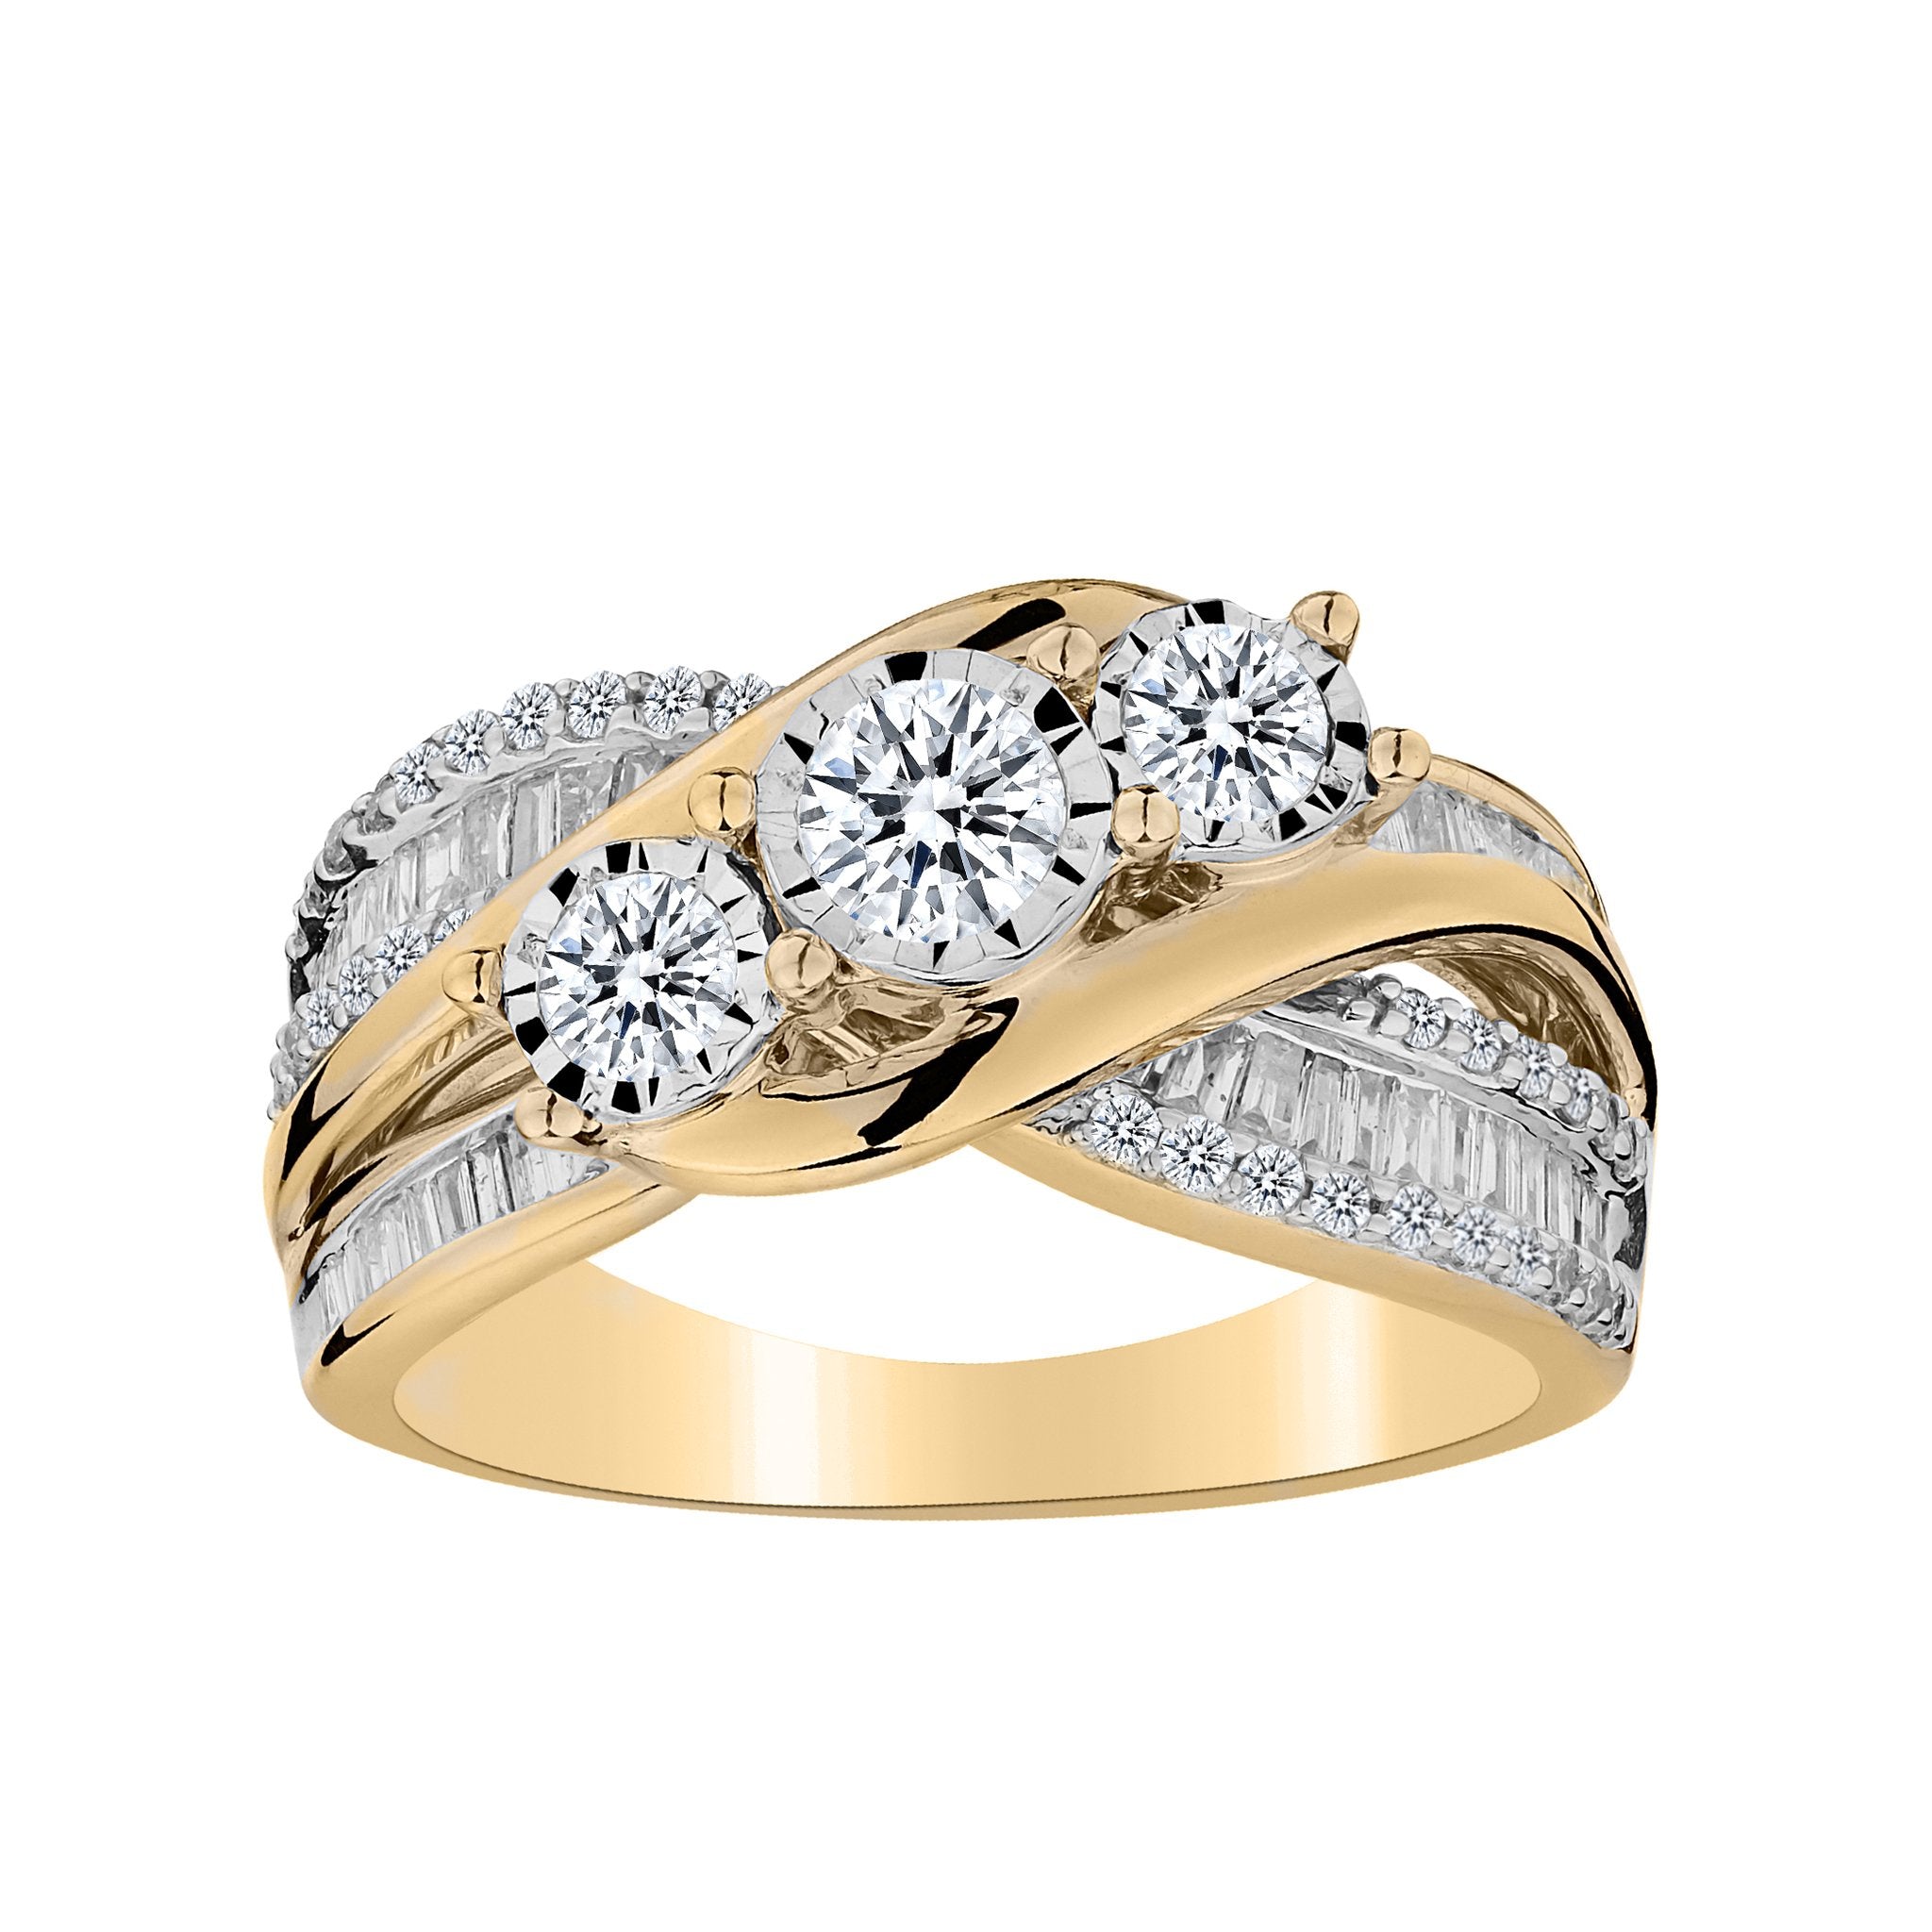 1.00 CARAT DIAMOND "PAST, PRESENT, FUTURE" RING, 10kt YELLOW GOLD. Fashion Rings - Griffin Jewellery Designs